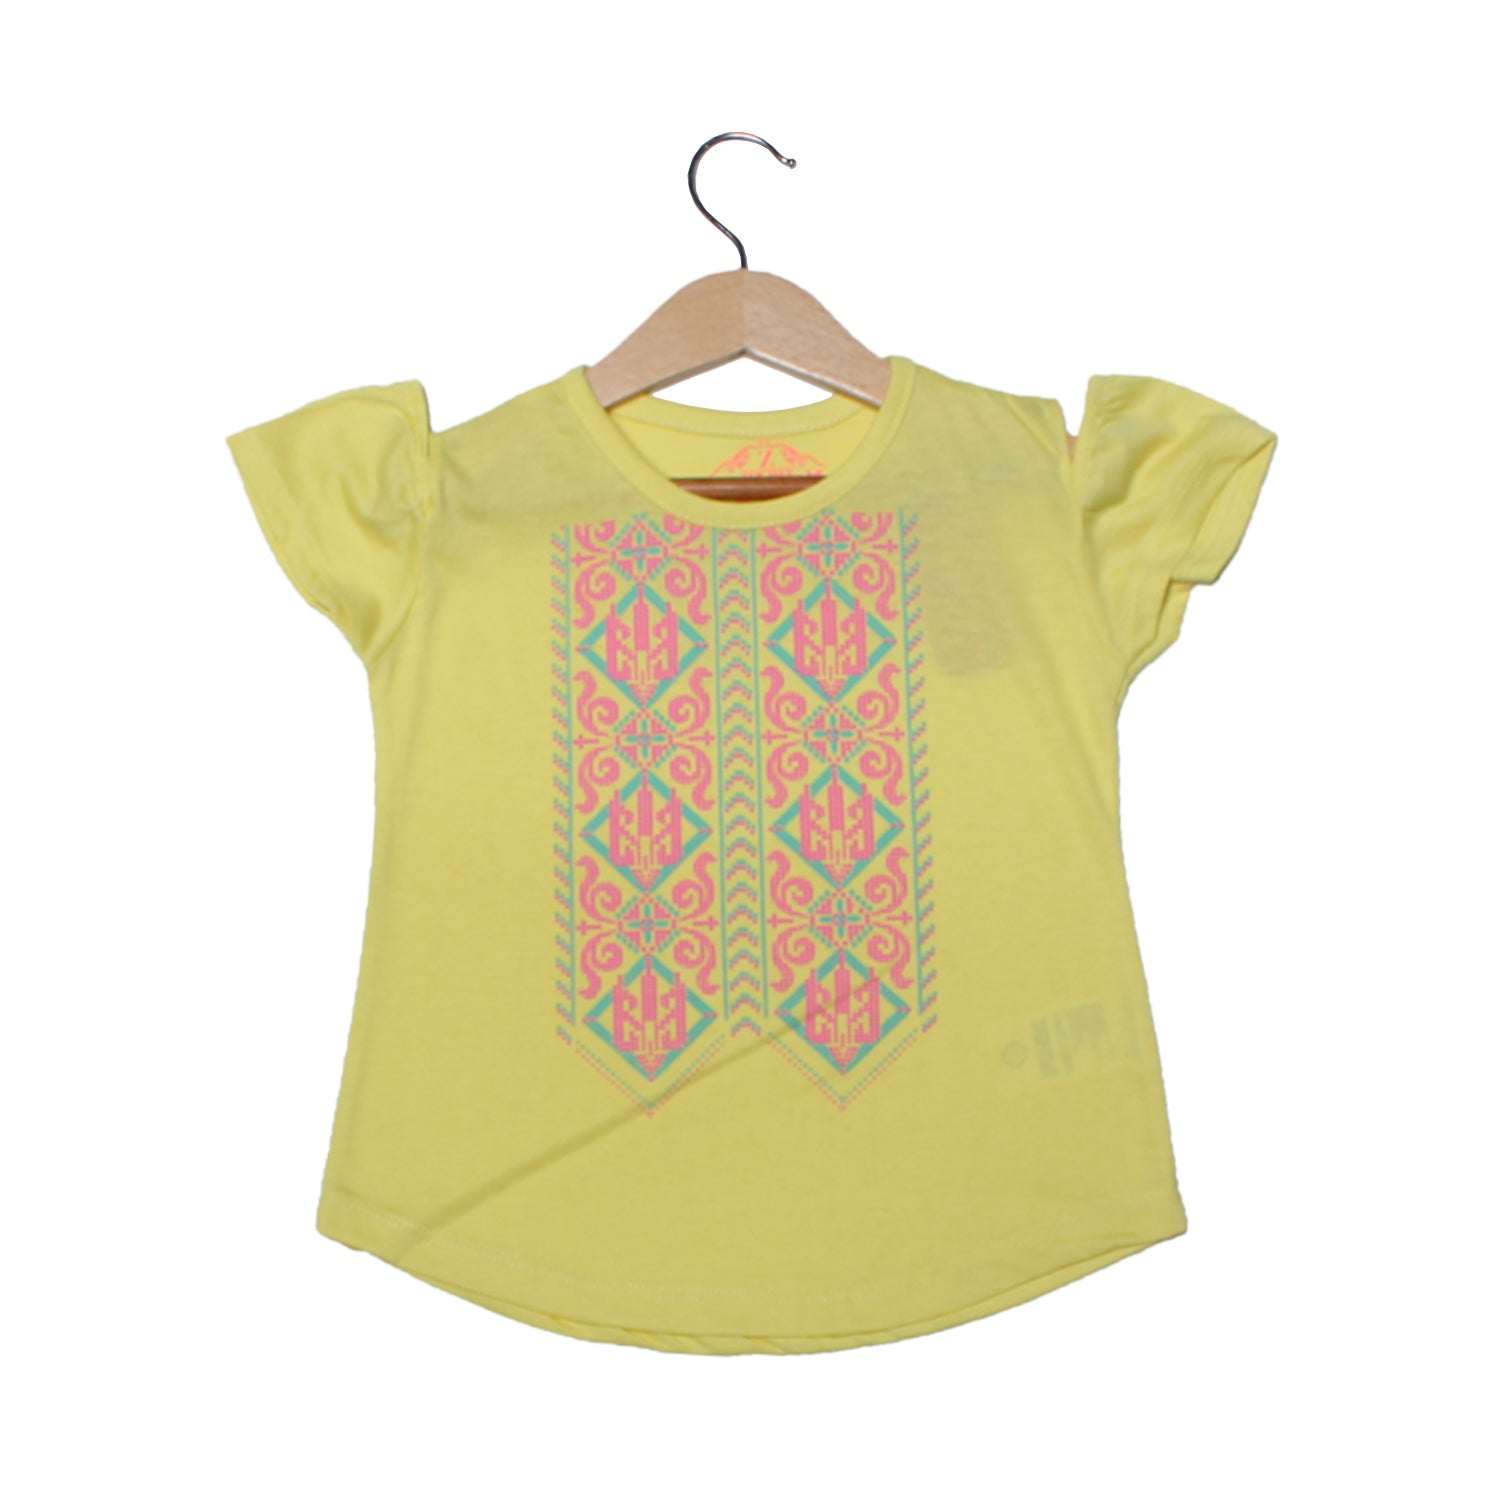 NEW YELLOW COLD SHOULDER DESIGN PRINTED T-SHIRT TOP FOR GIRLS